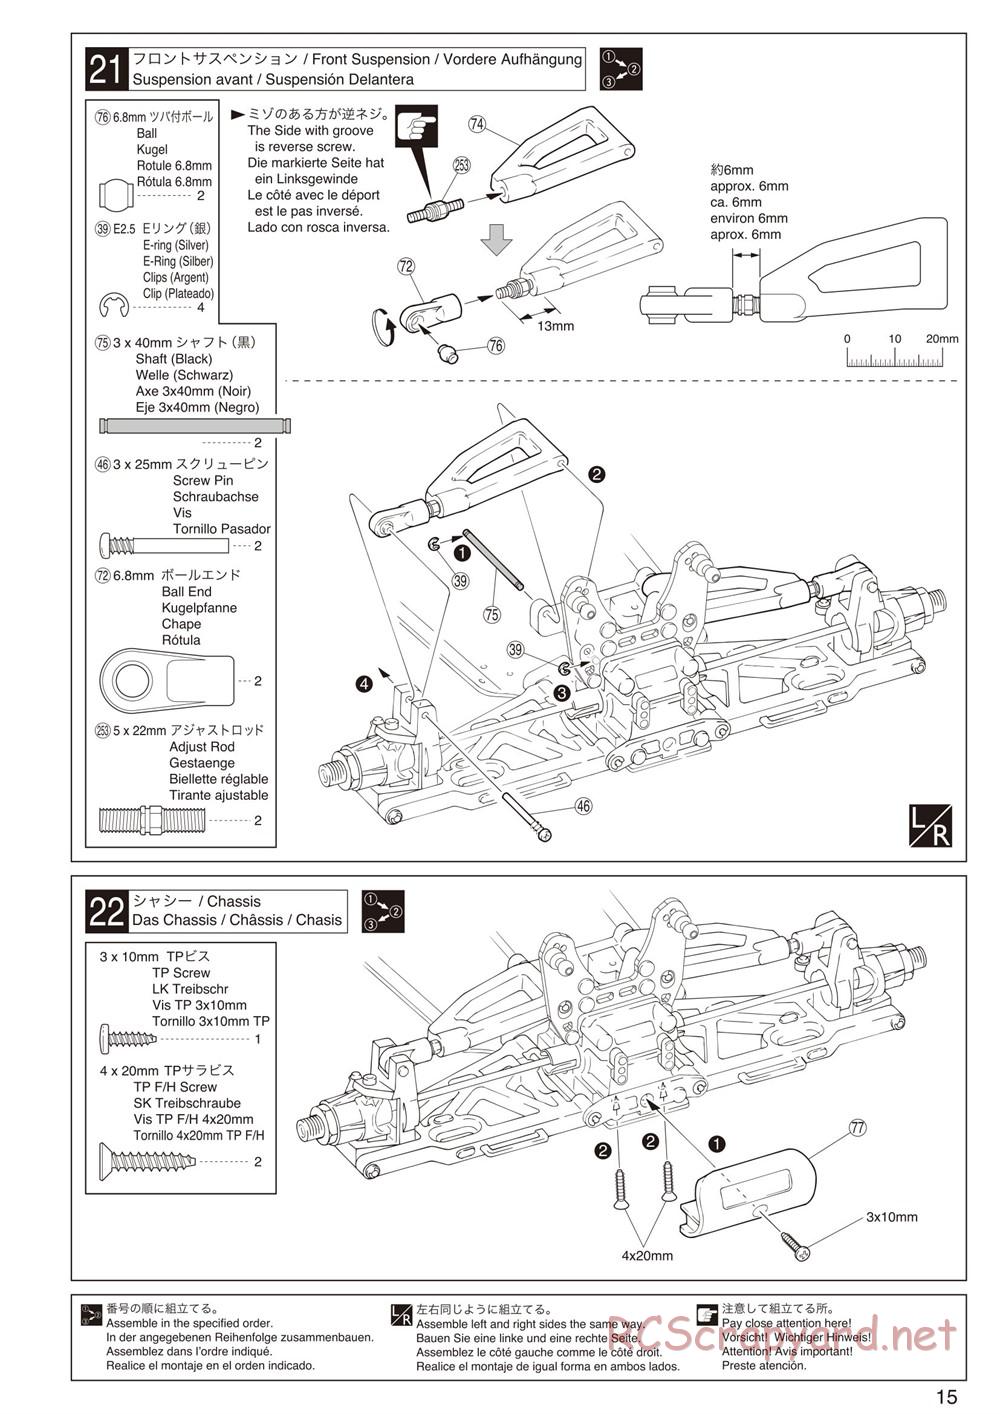 Kyosho - Inferno Neo 2.0 - Manual - Page 15